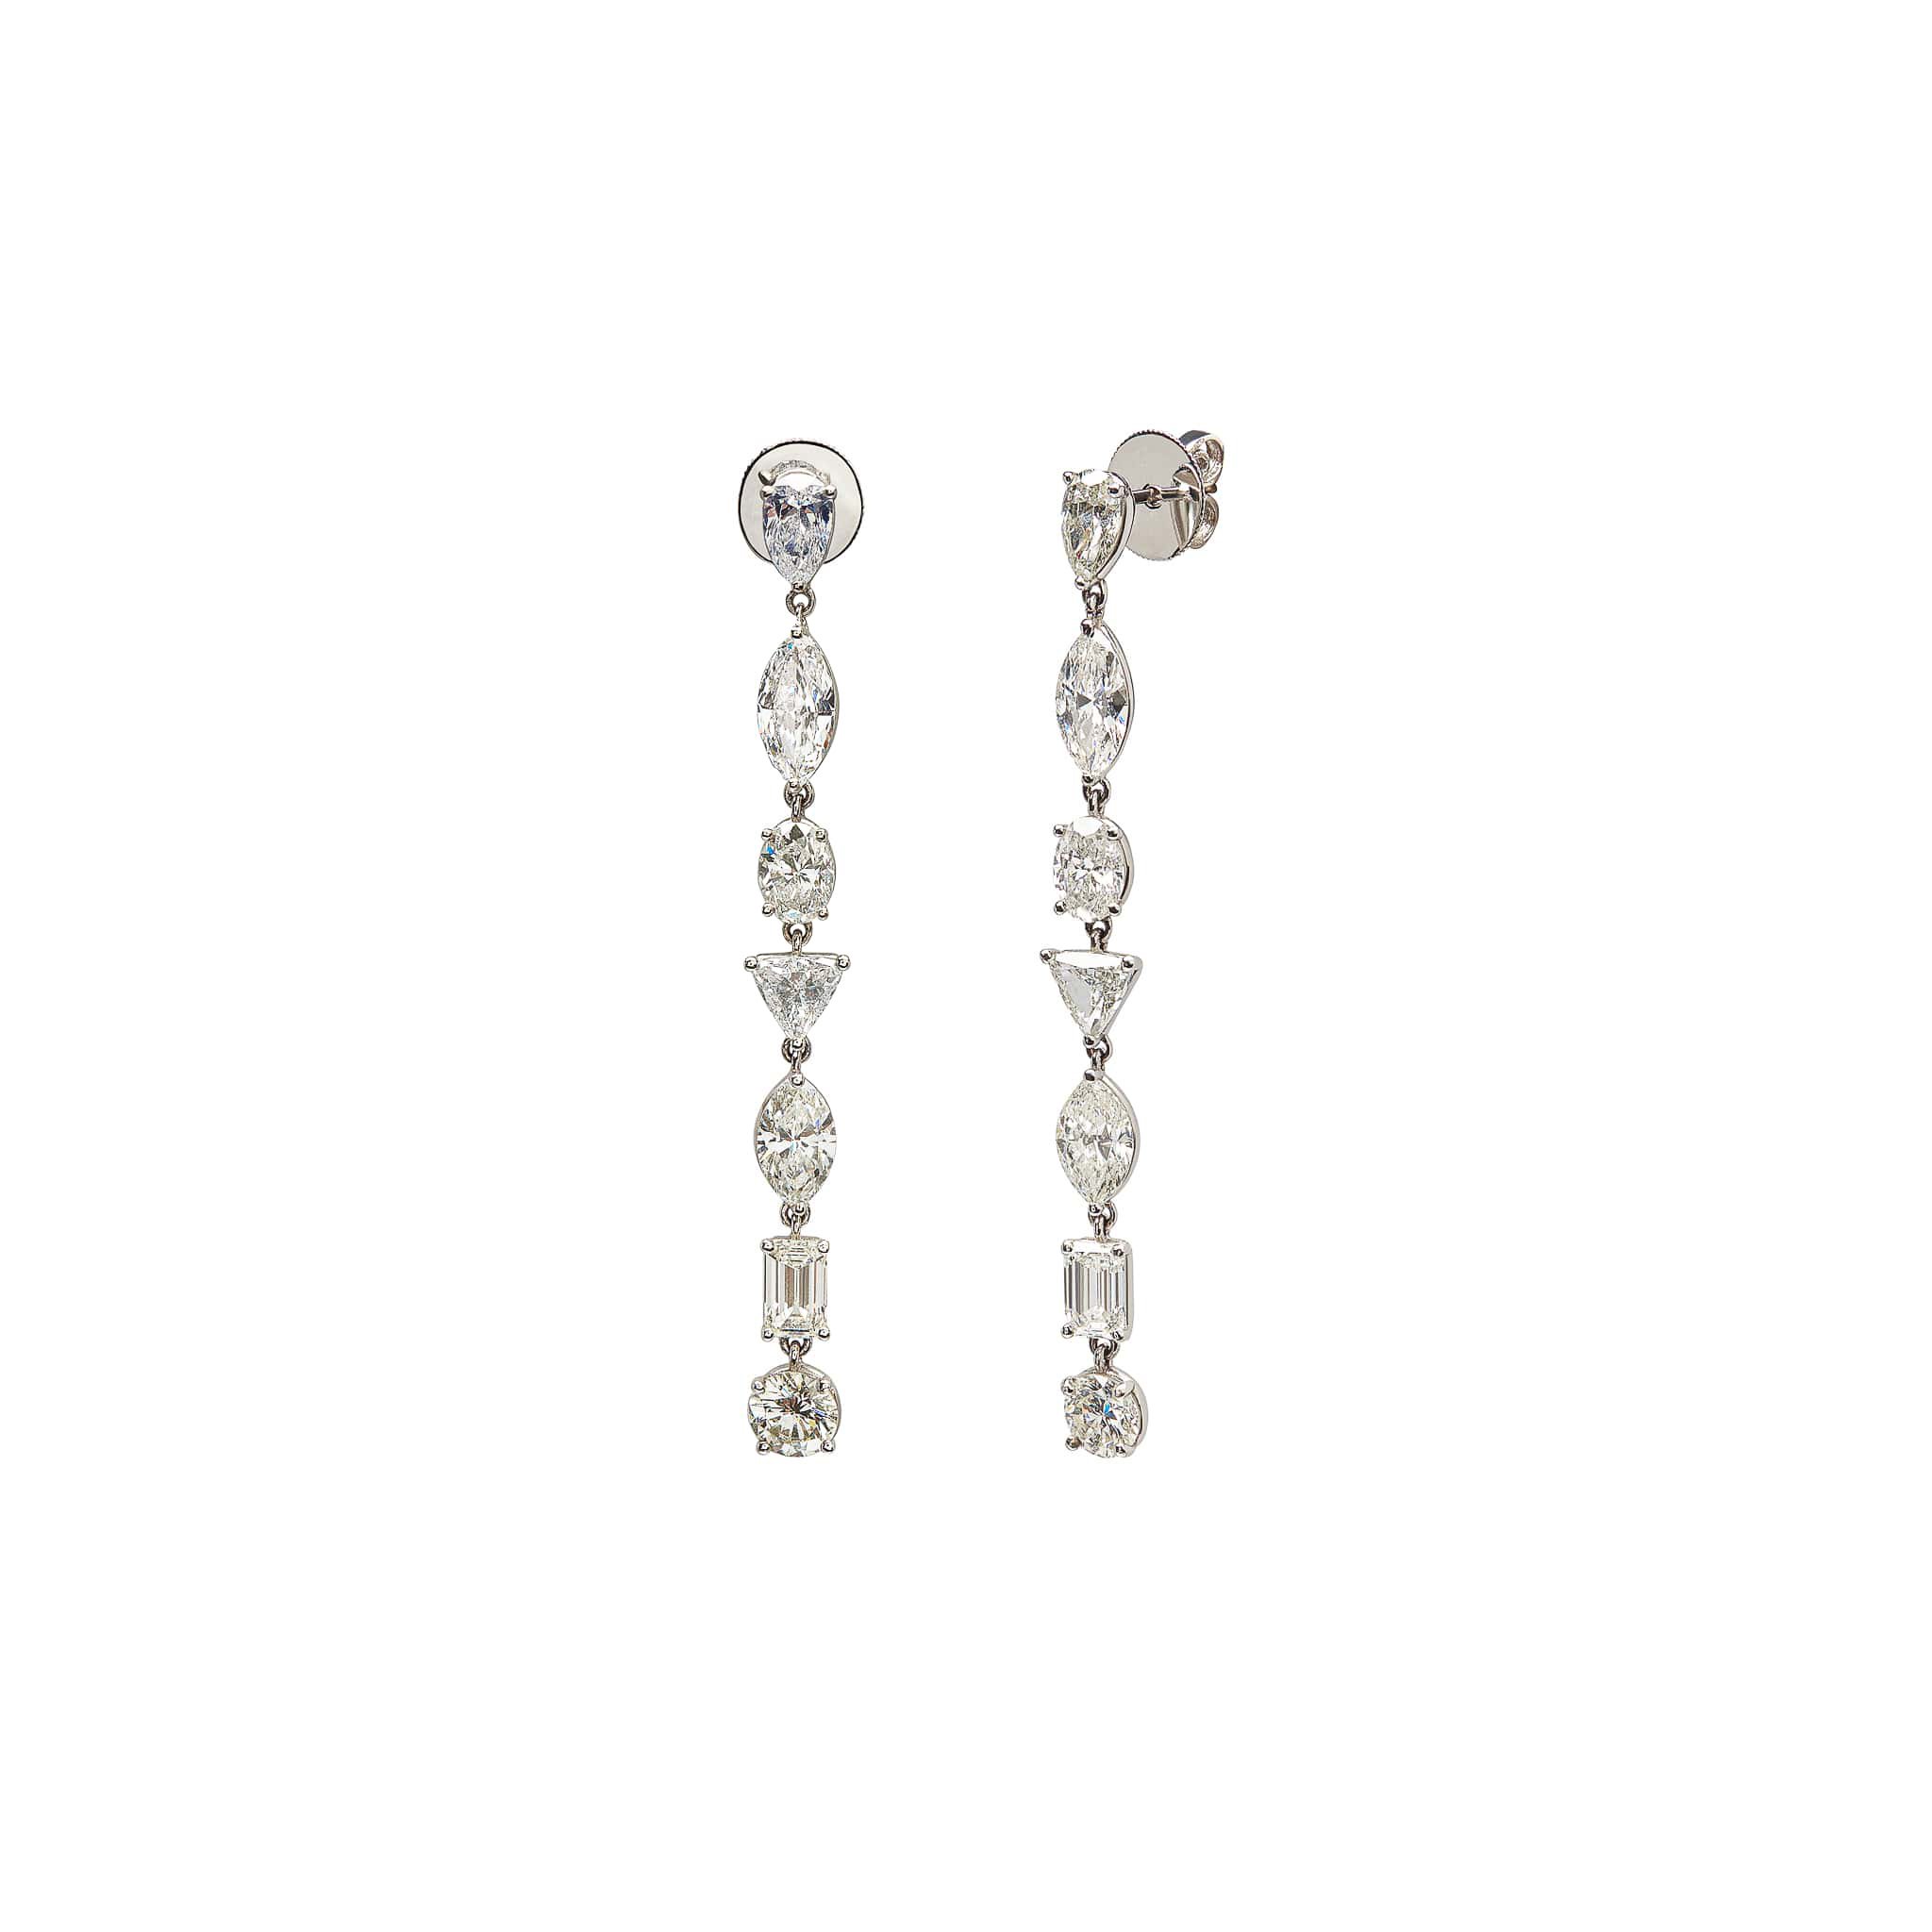 Jewelry Earrings Product Photography 00.jpg